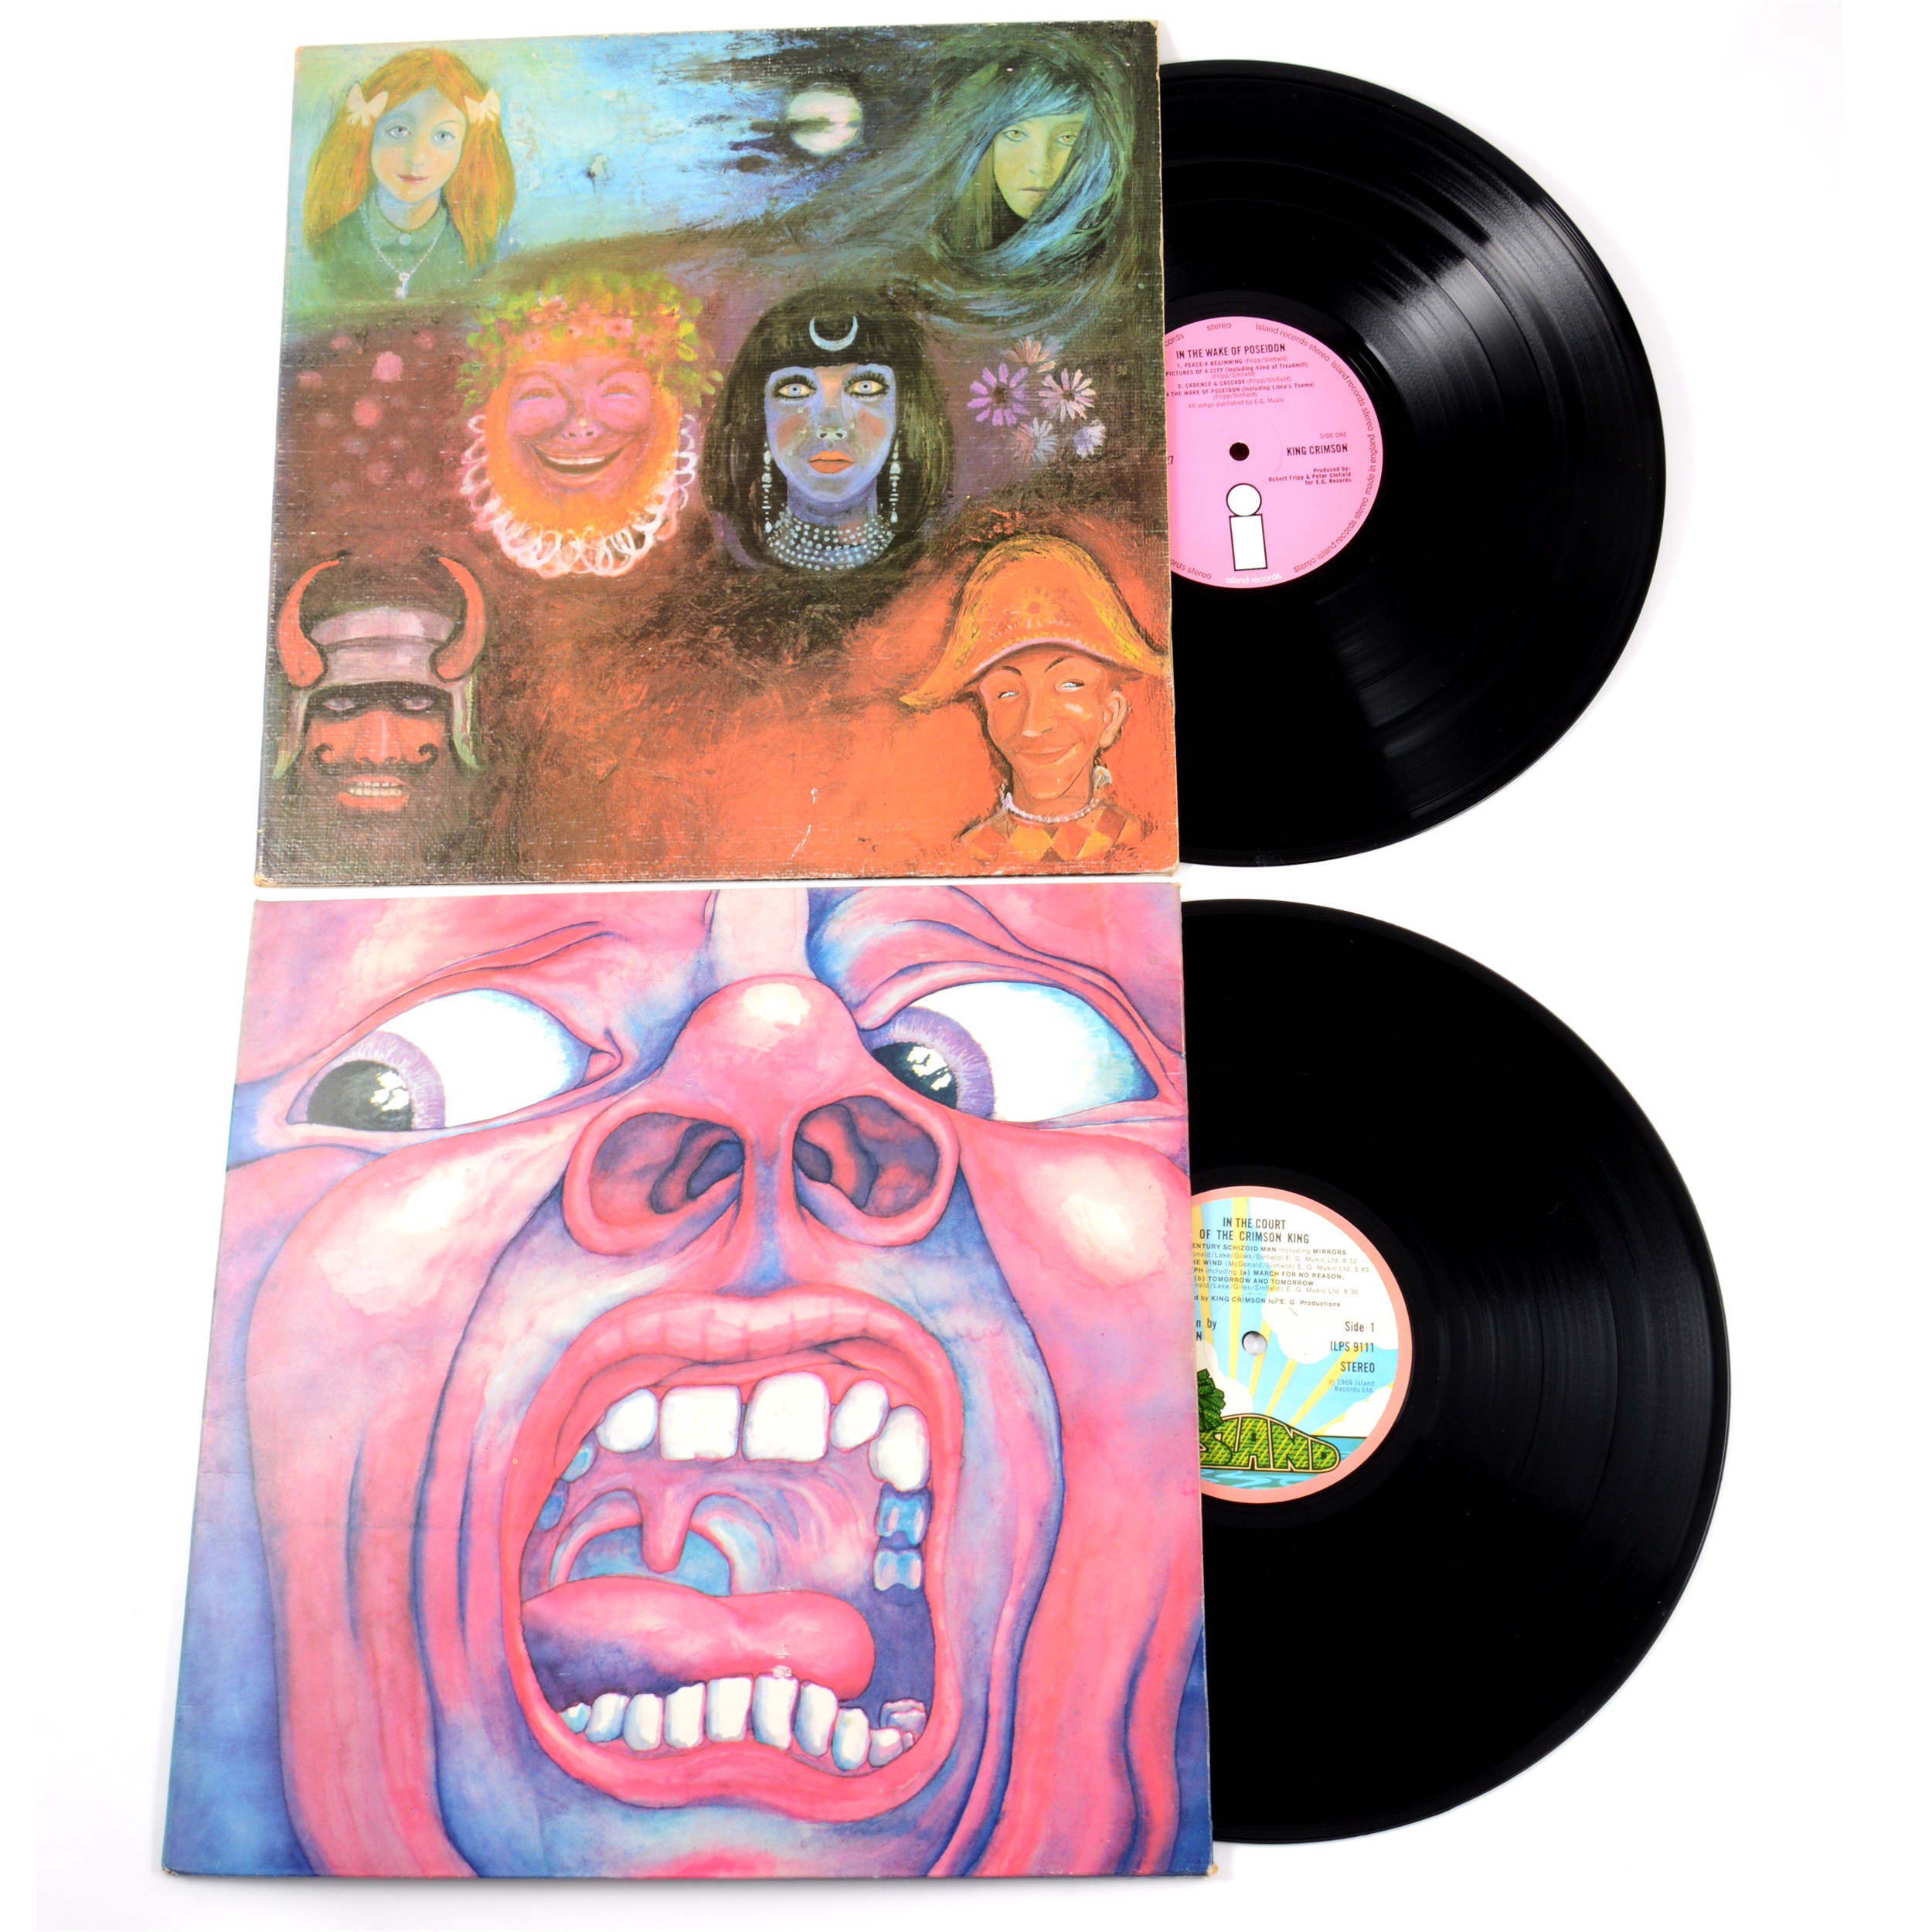 Lot 447 - King Crimson - Two LP albums, In the